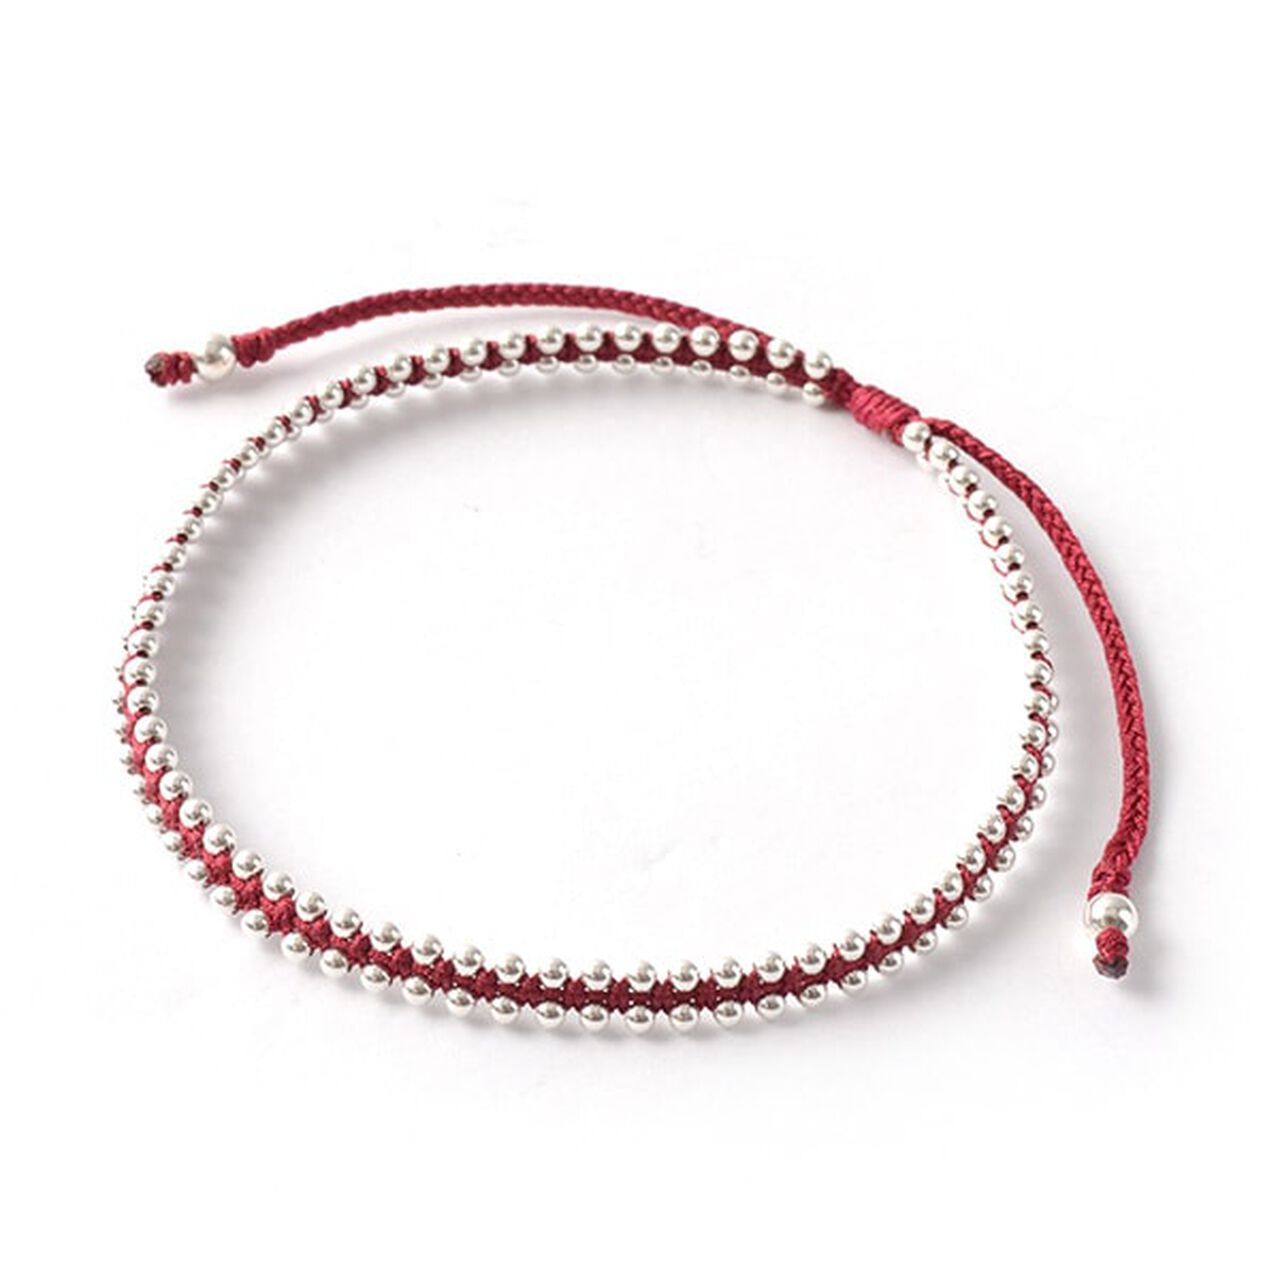 Silver Ball Bead Duo Anklet,DarkRed, large image number 0